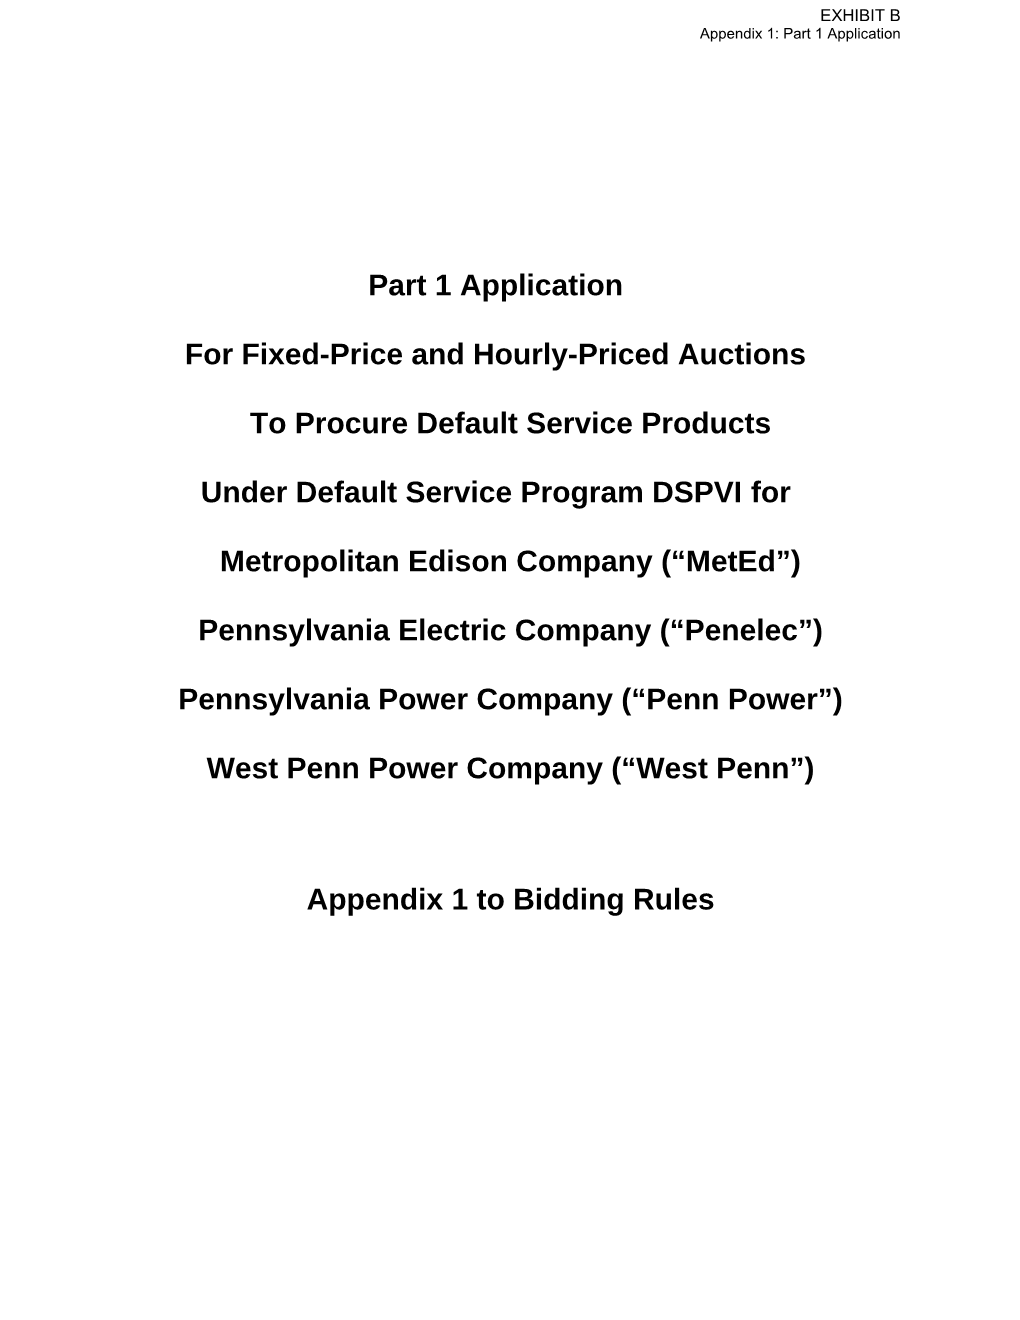 Part 1 Application: FEPA Fixed-Price Auction to Procure Default Service Products